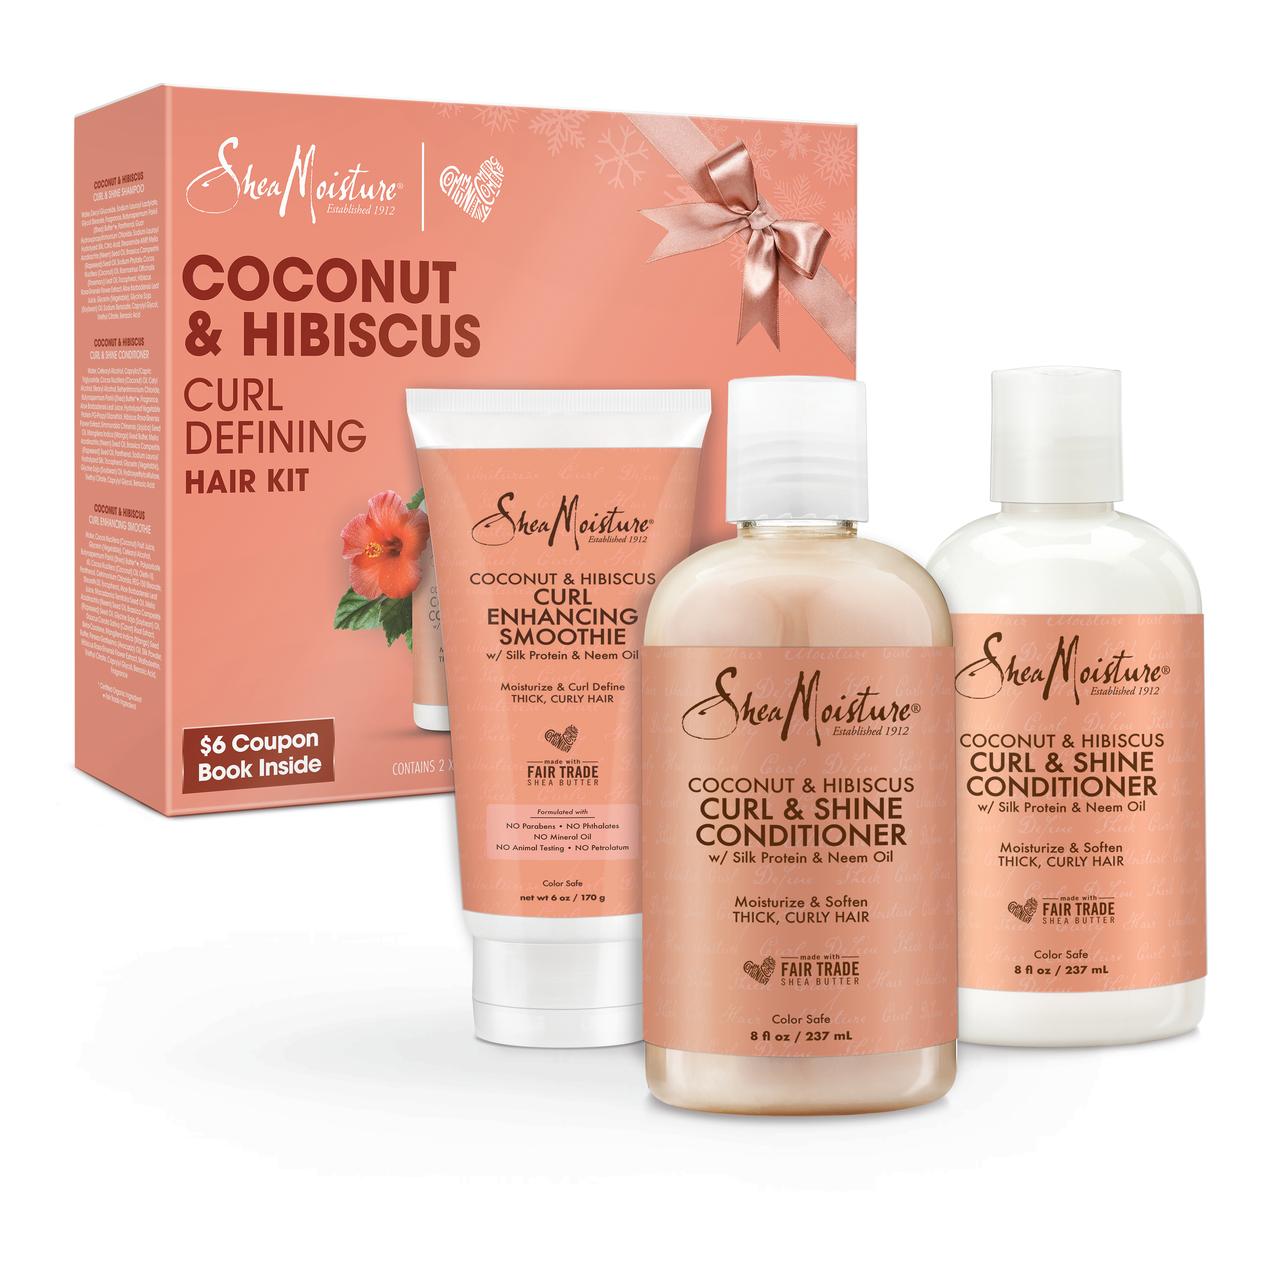 ($19 Value) SheaMoisture Coconut and Hibiscus Curl Defining Shampoo and Conditioner Gift Set, Phthalate Free, 3 Piece - image 1 of 3